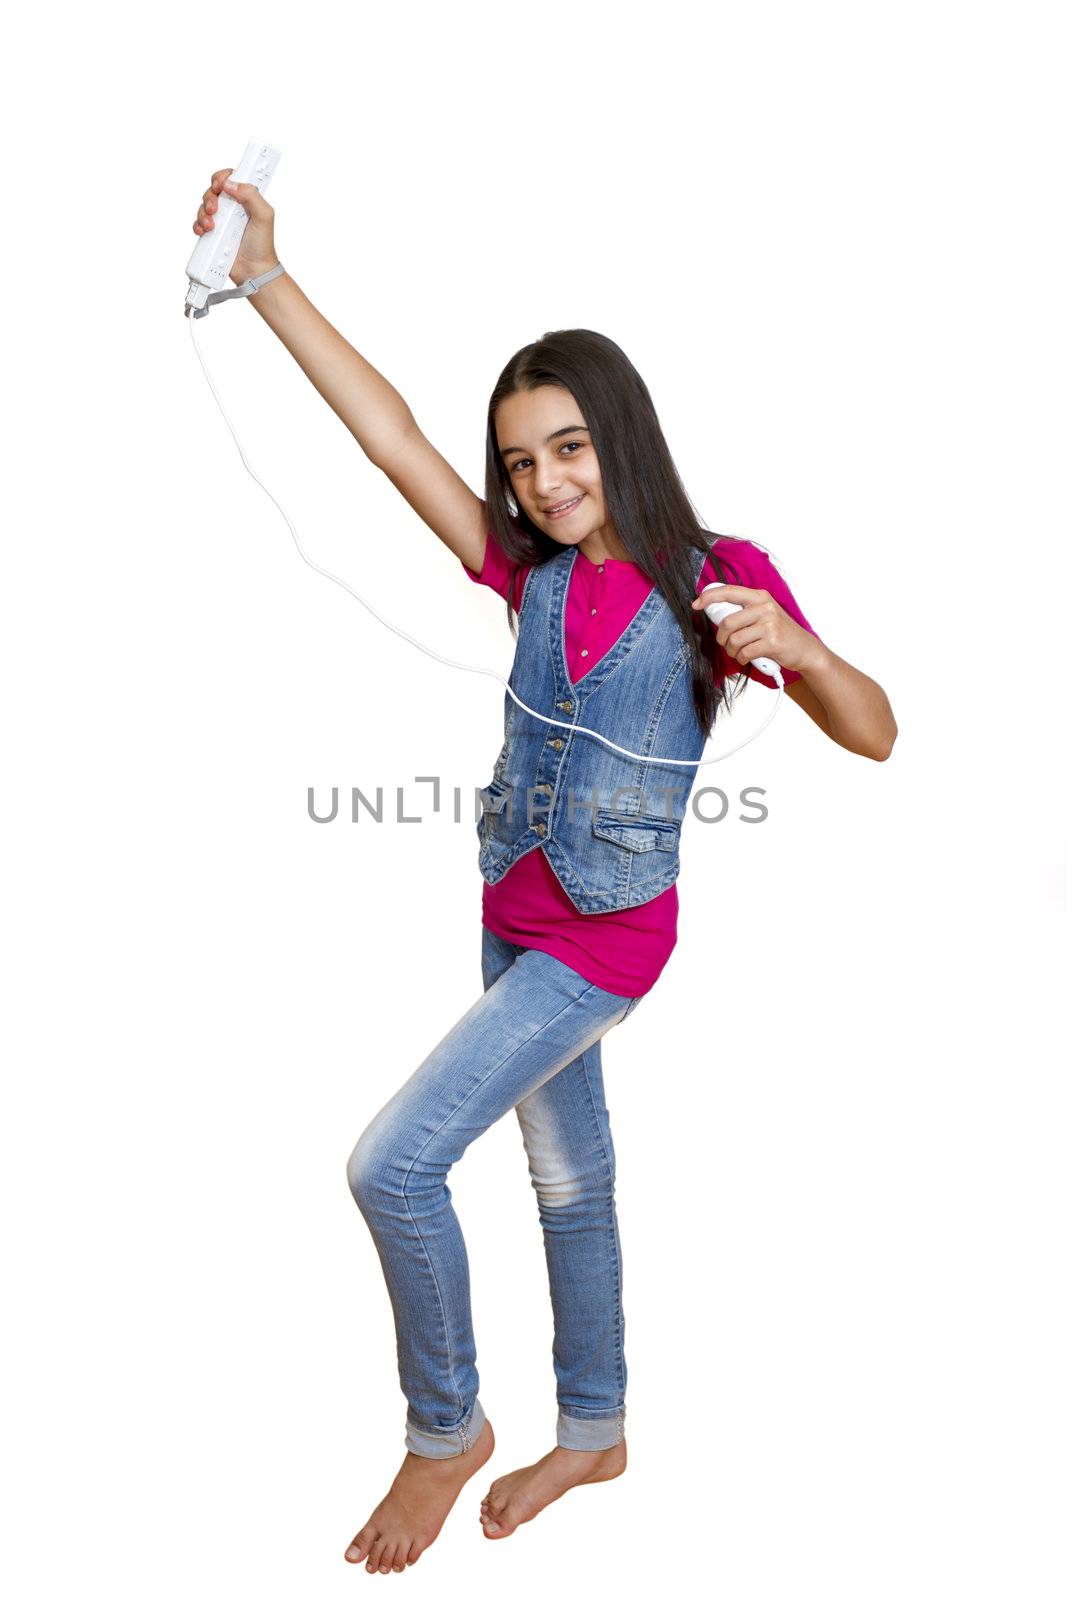 teenage girl playing video games by manaemedia